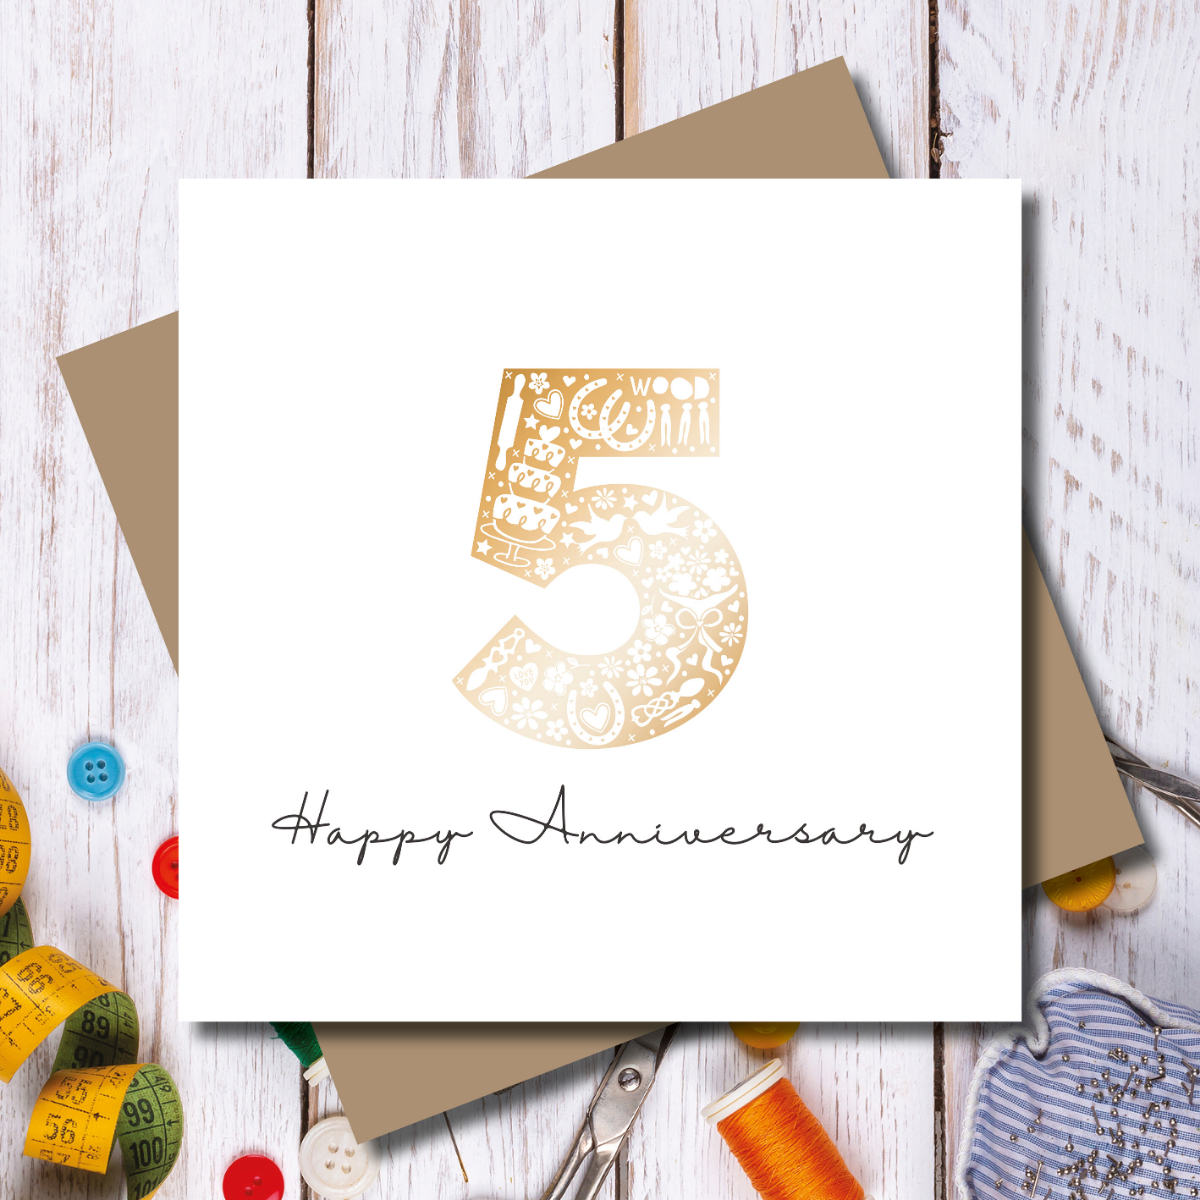 Daisy 5th Wood Wedding Anniversary Rose Gold Foil Greeting Card